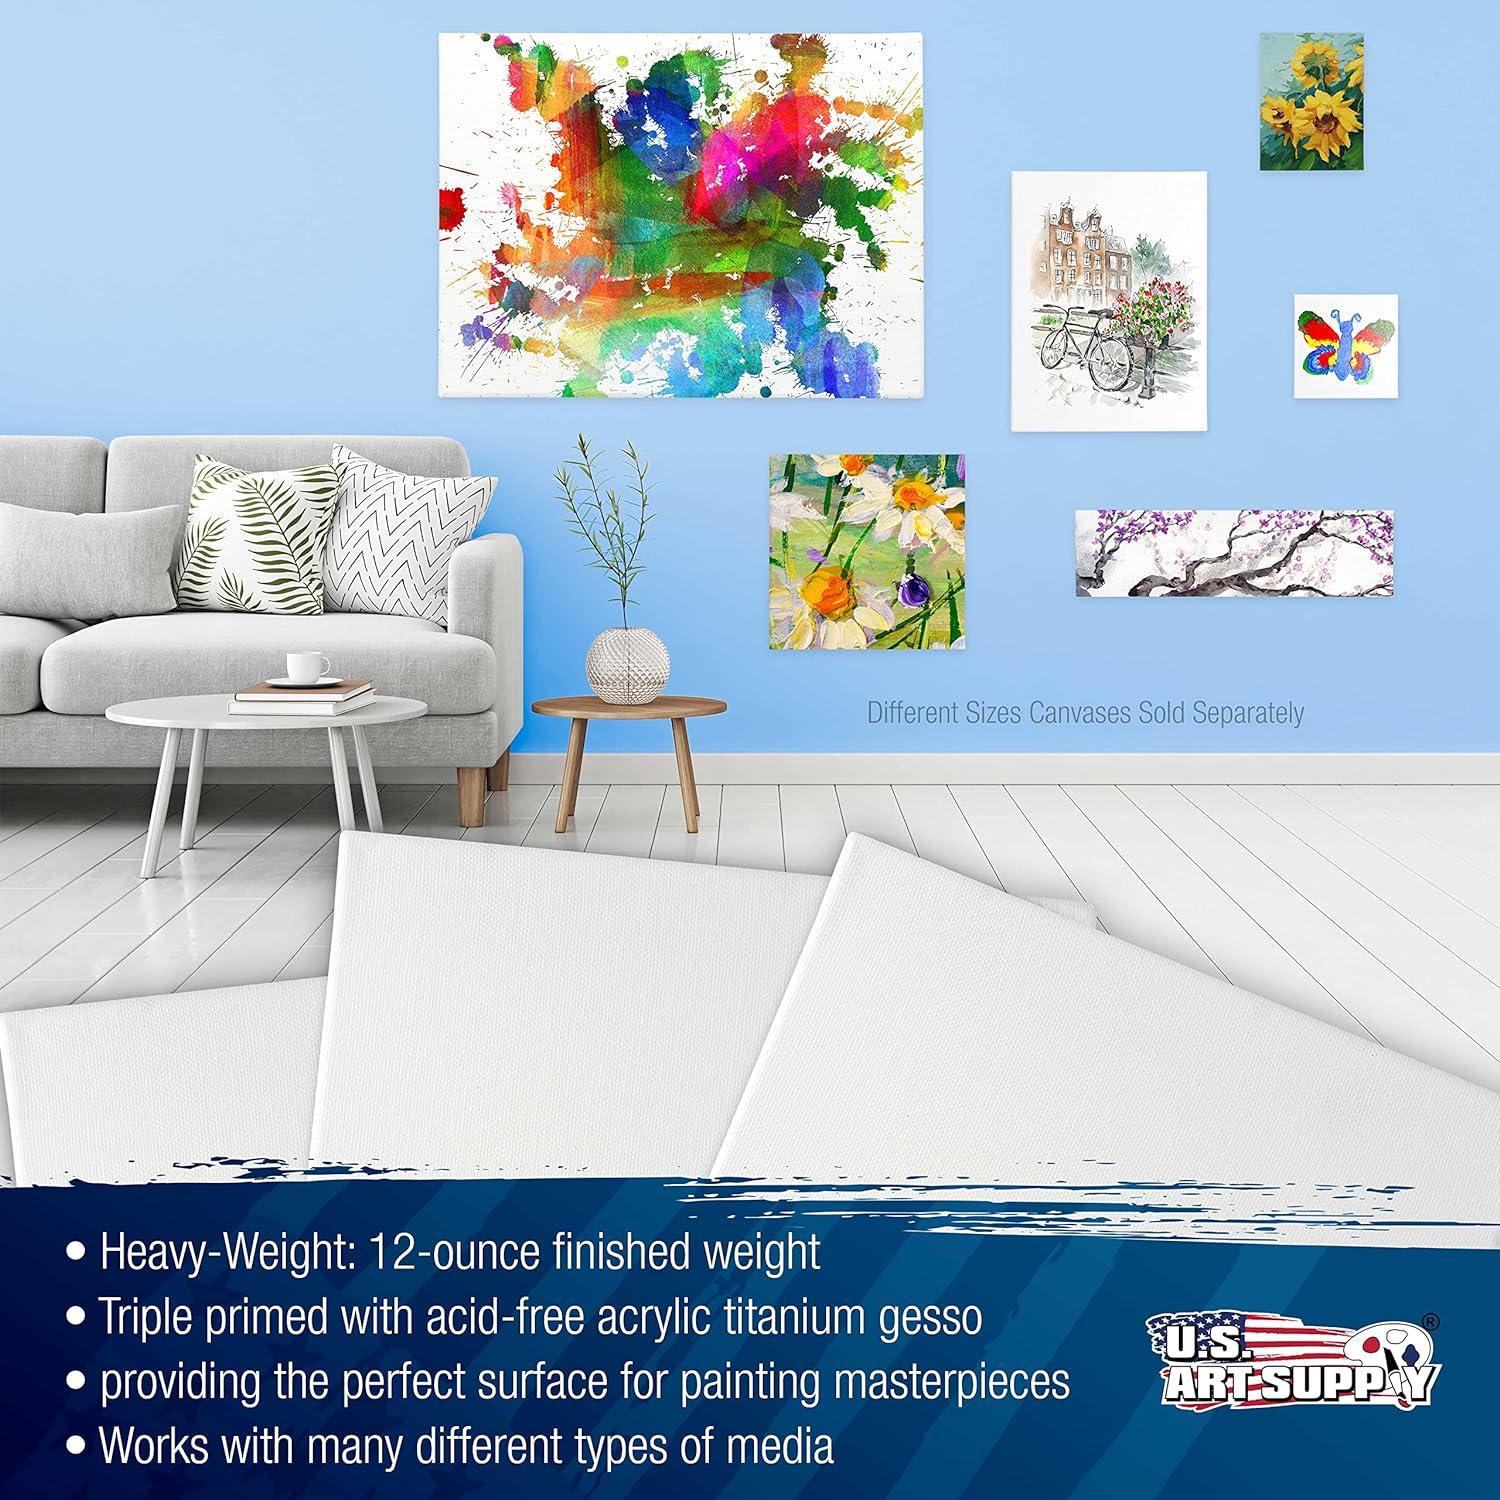 Wholesale paint supplies To Achieve Amazing Works of Art 